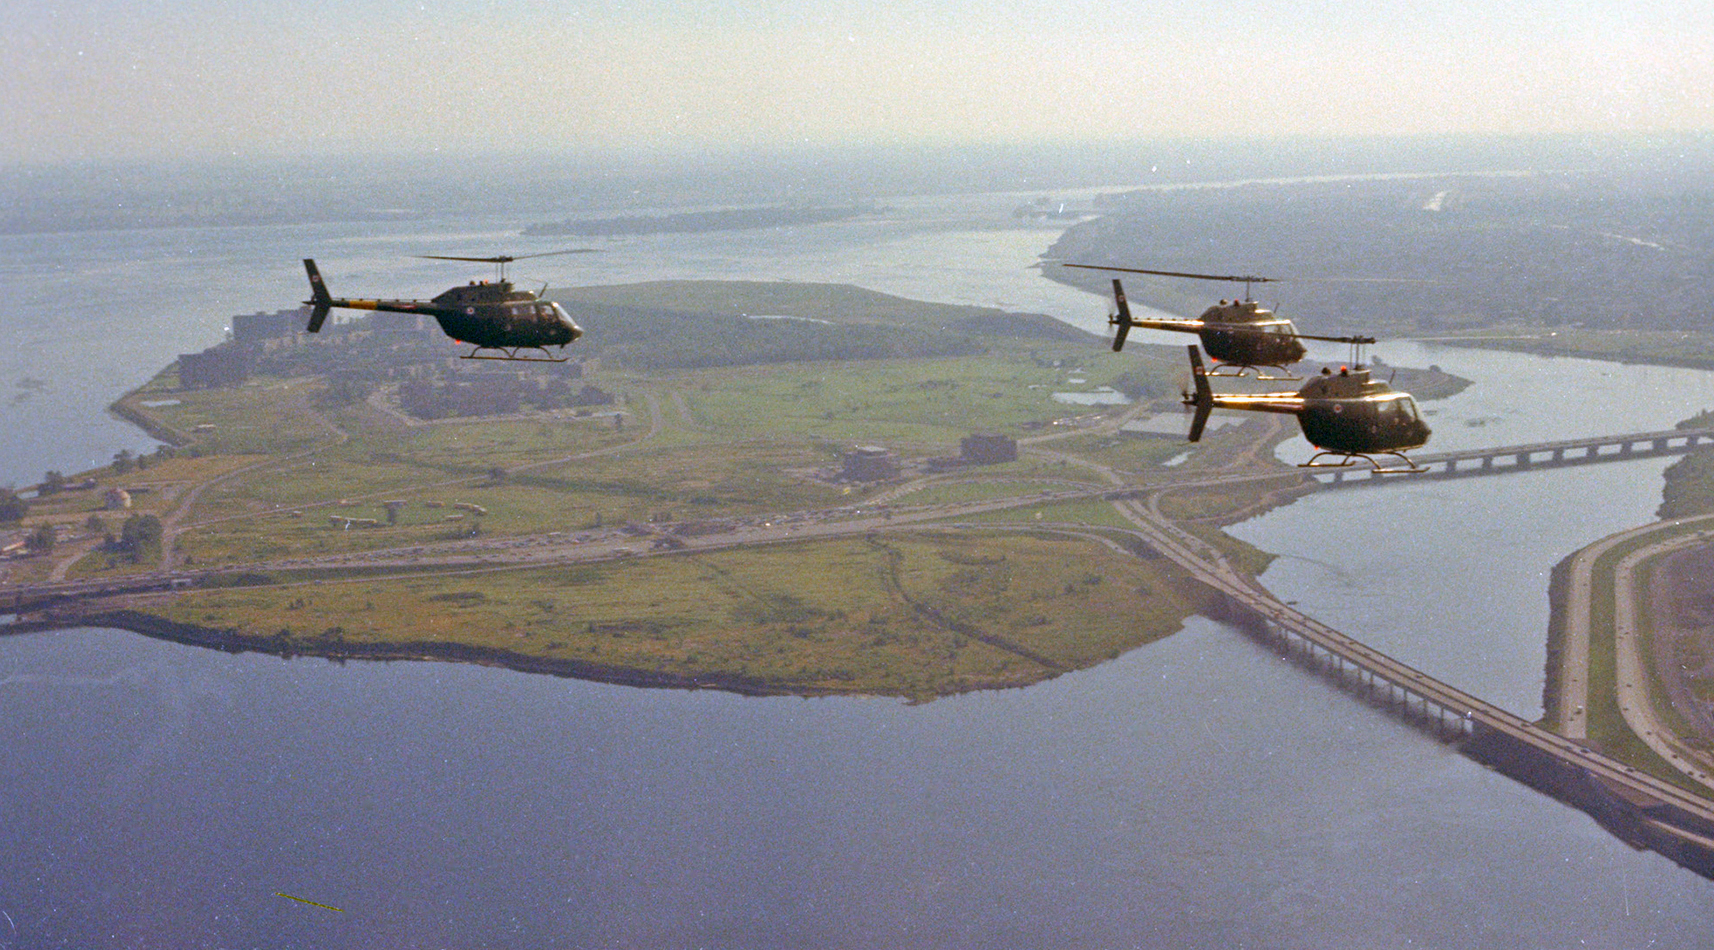 Three 427 Squadron CH-136 Kiowa helicopters from Petawawa, Ontario, fly over Nun's Island in Montreal during Exercise Power Play in August 1974. 427 Squadron began operating CH-136 Kiowa light observation helicopters in the 1970s. PHOTO: DND Archives, IMC74-123